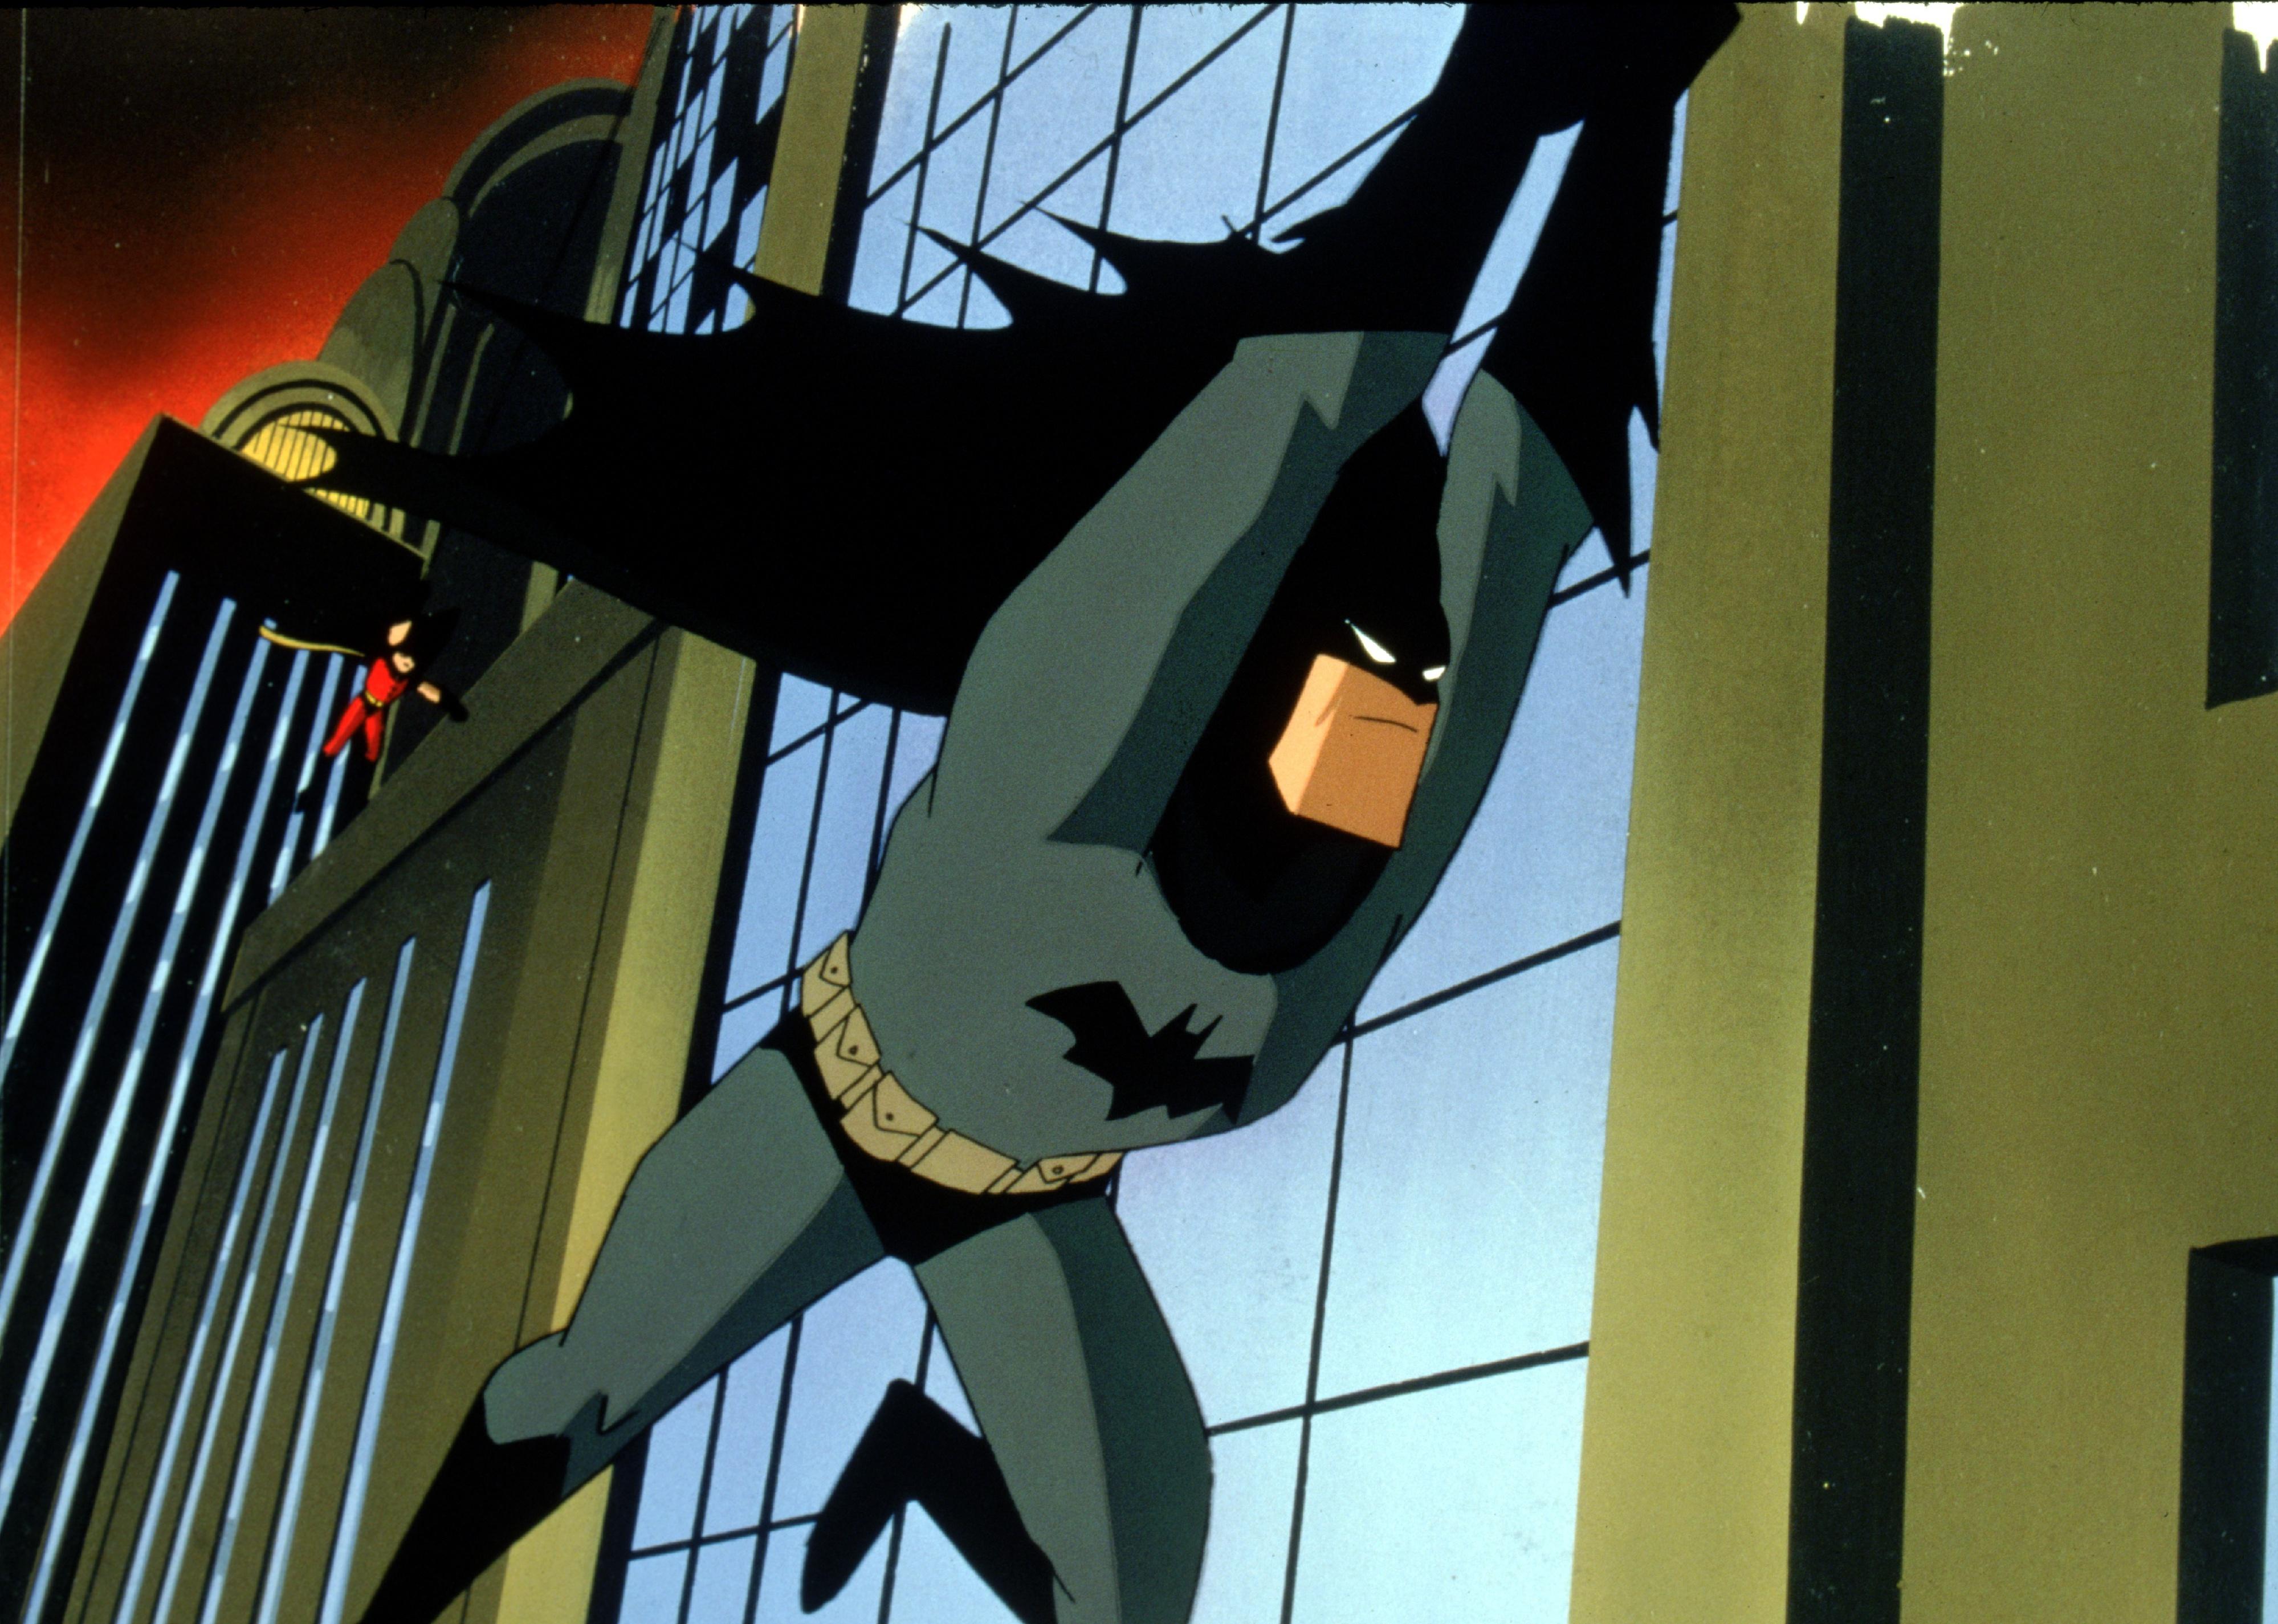 An animation of Batman and Robin flying though downtown.